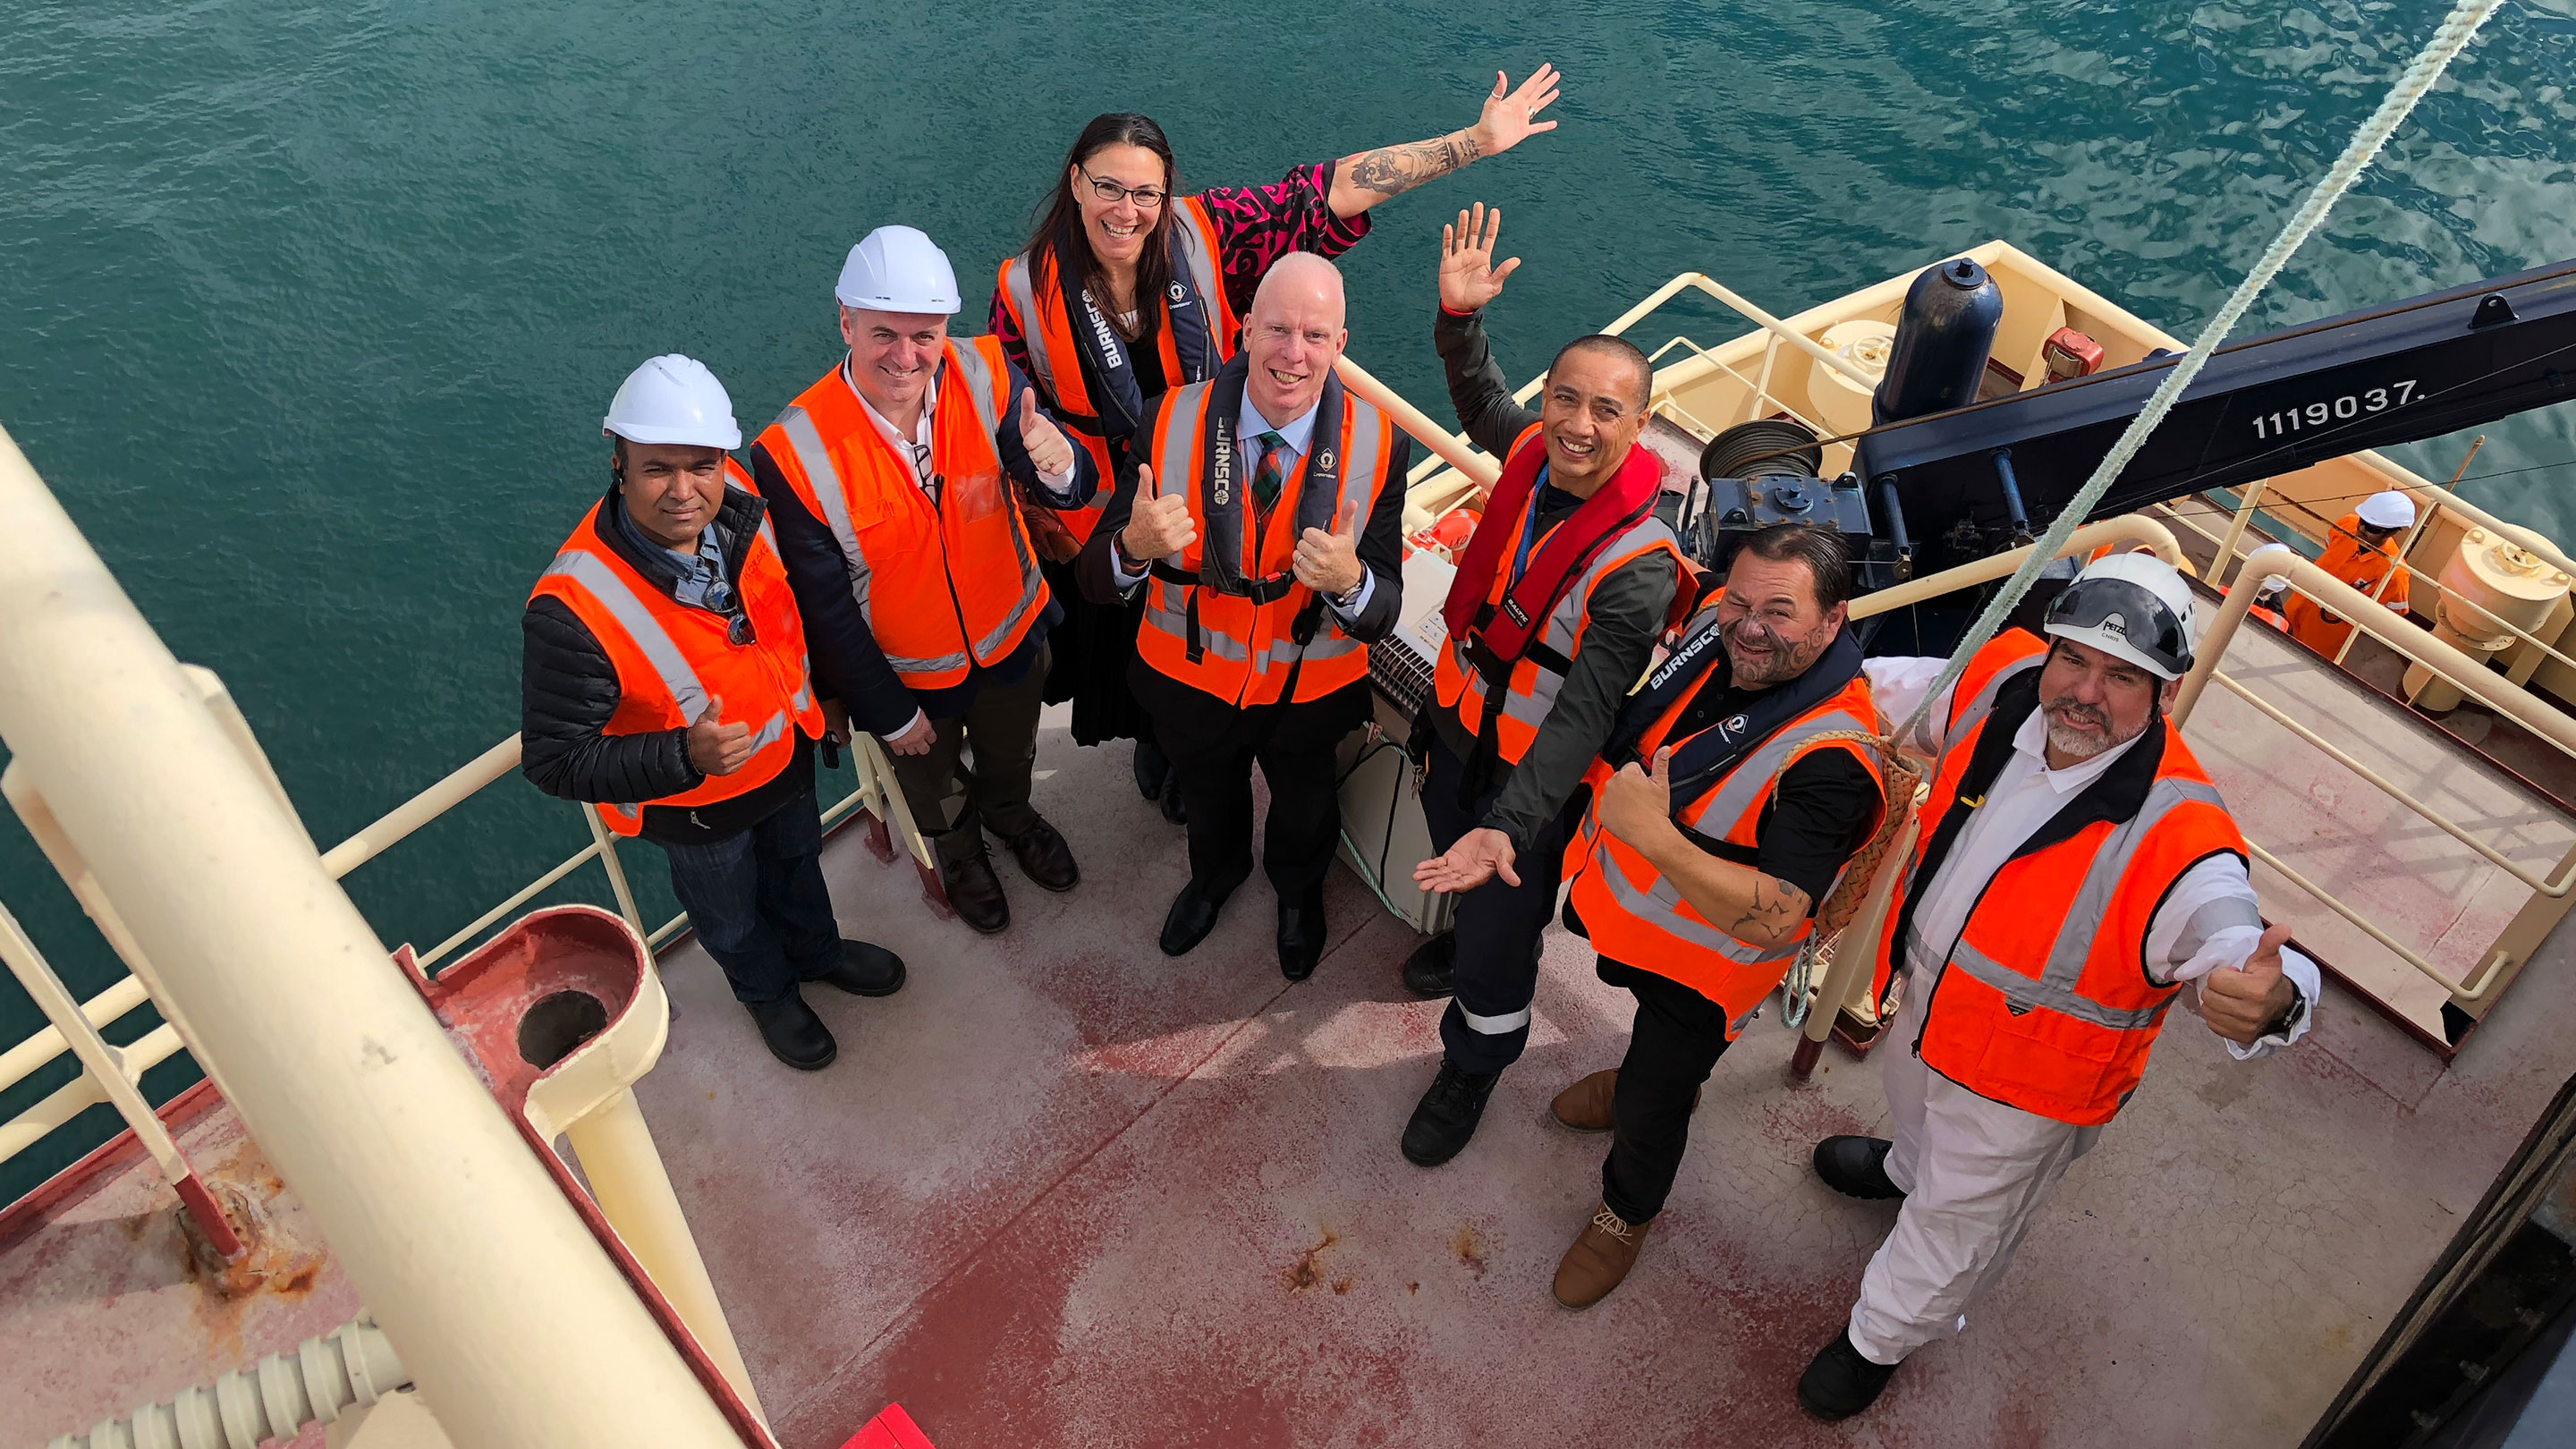 Image A traditional whakatau (welcoming ceremony) attended by Mobil staff, local dignitaries and members of local Iwi (Māori tribal groups) welcomed the MT Korimako to its new home at Tauranga Moanas (Tauranga harbours) seaport on Friday 30 April